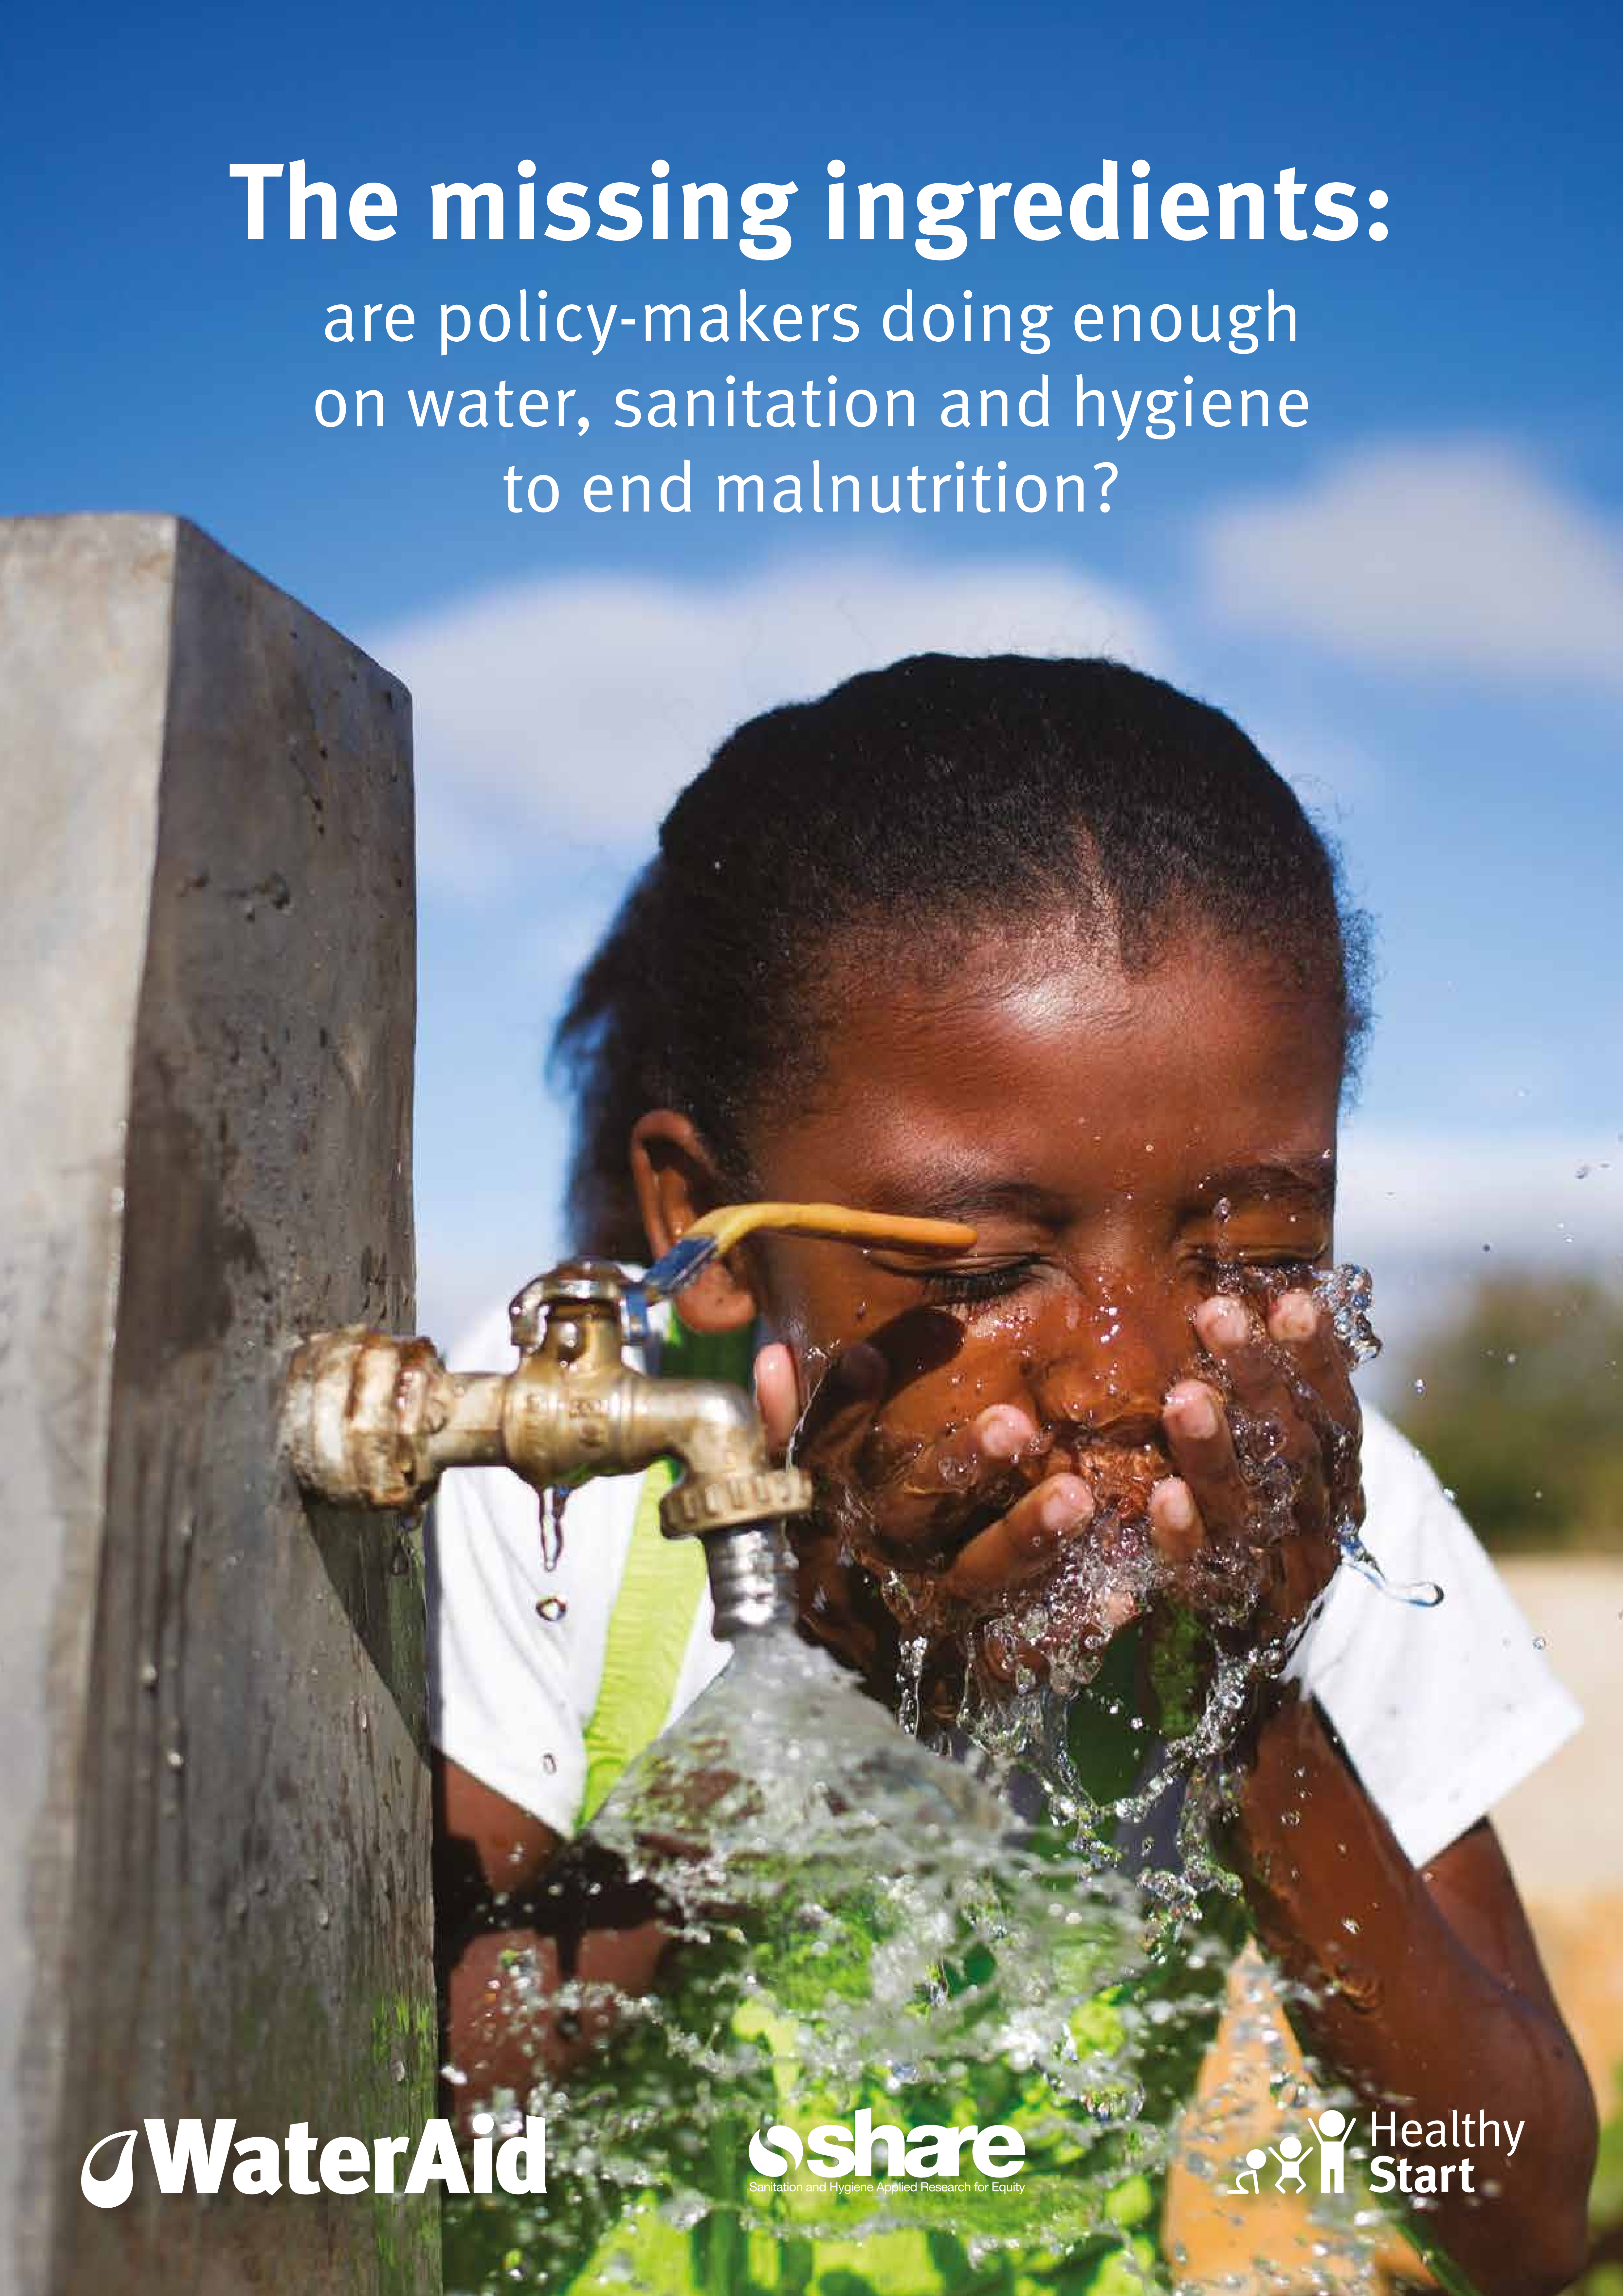 New report analyses comprehensive nutrition and WASH approaches to end malnutrition